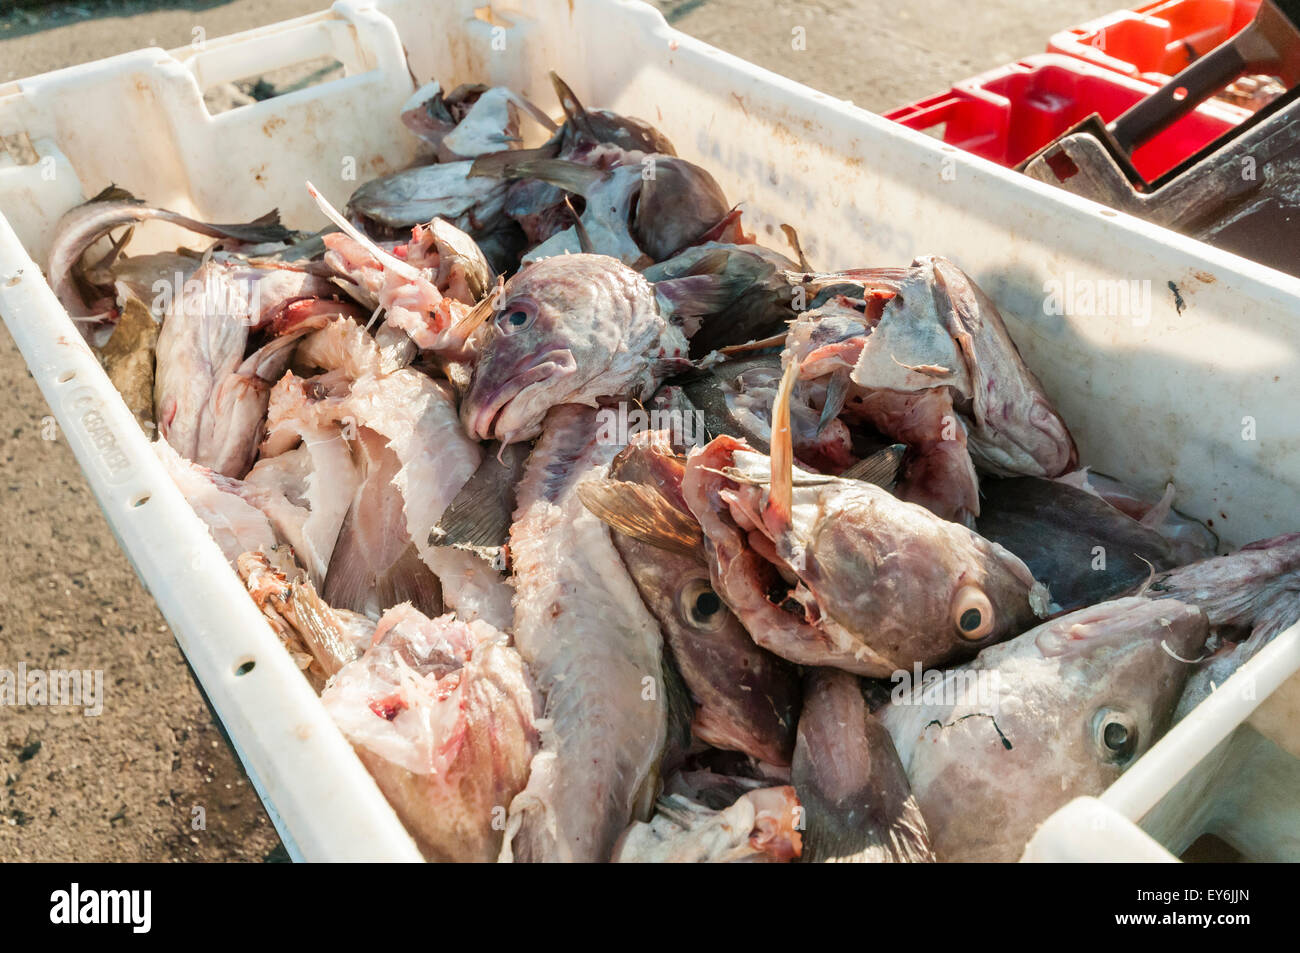 Cod heads left in a crate at a fishing harbour Stock Photo